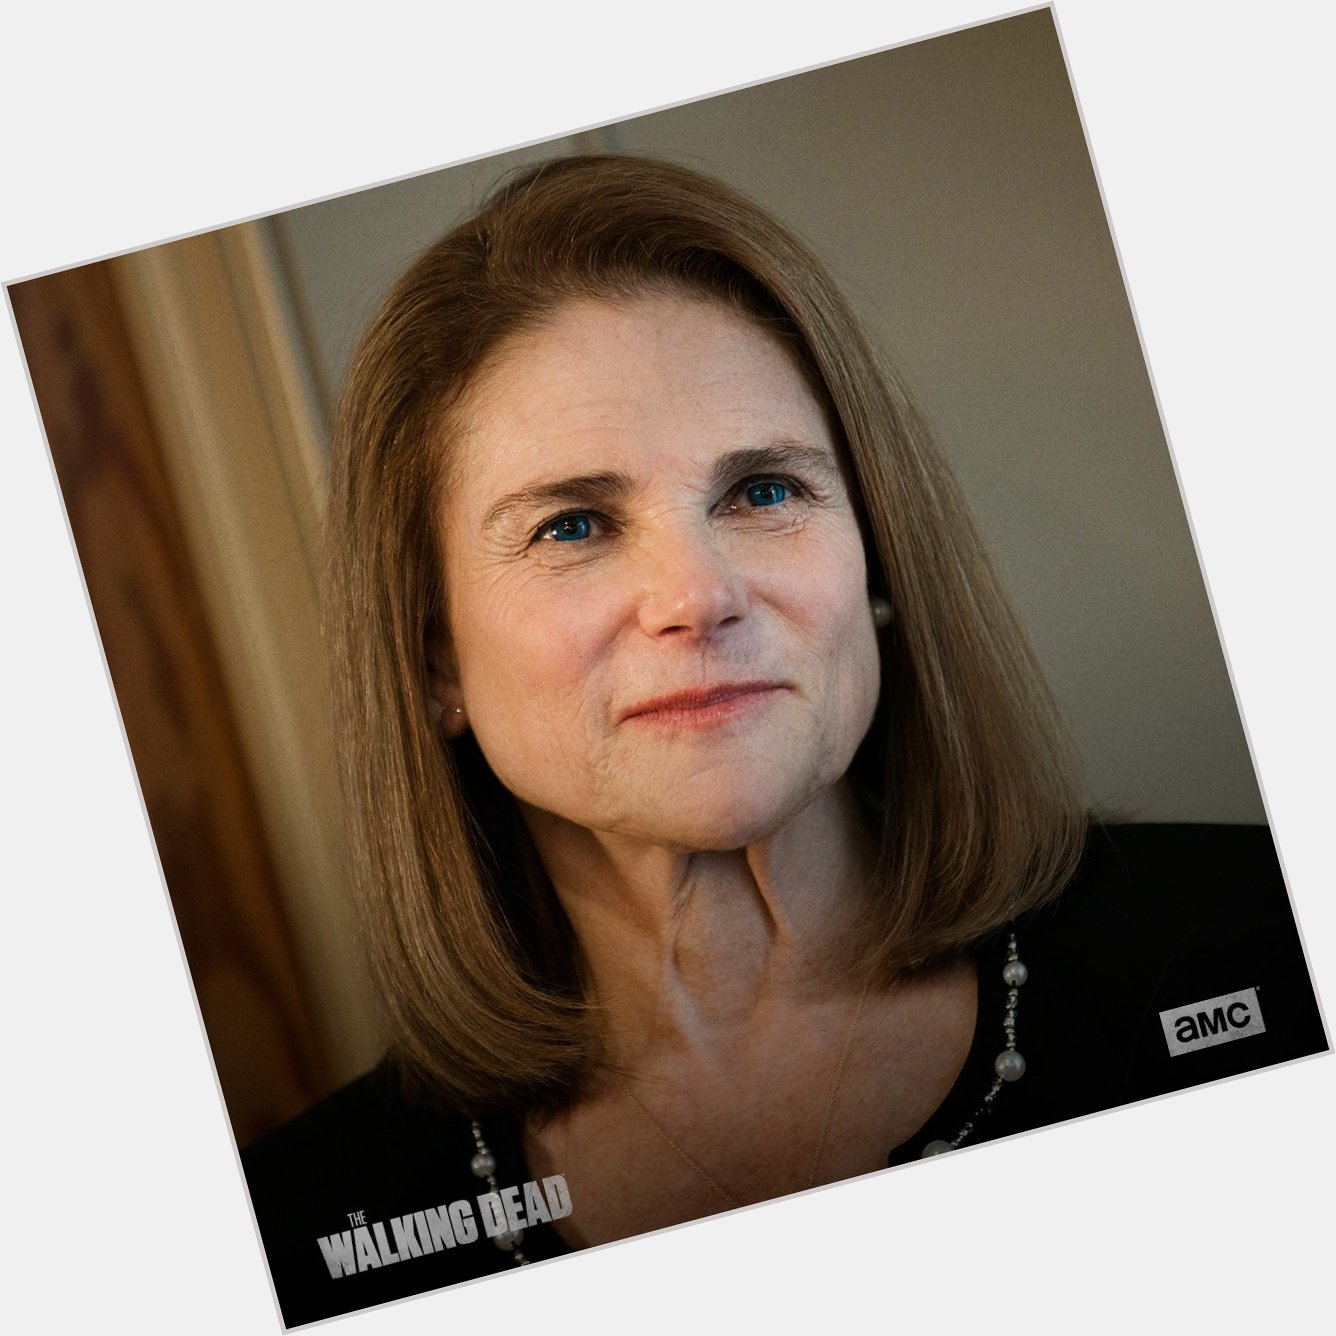 Happy birthday to our favorite former-congresswoman-turned-safe-zone-leader, Tovah Feldshuh  